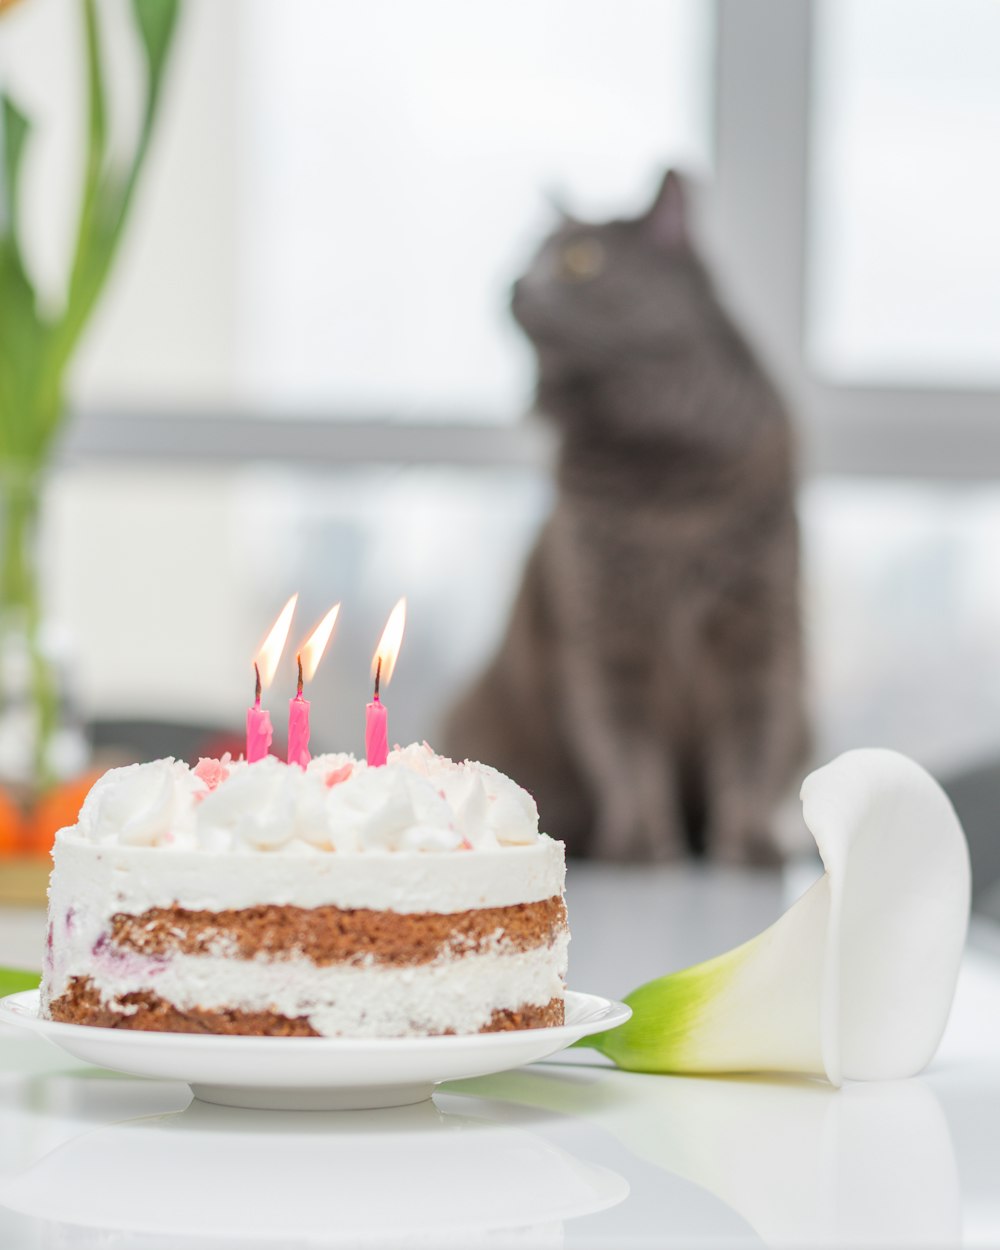 a cat sitting behind a cake with candles on it